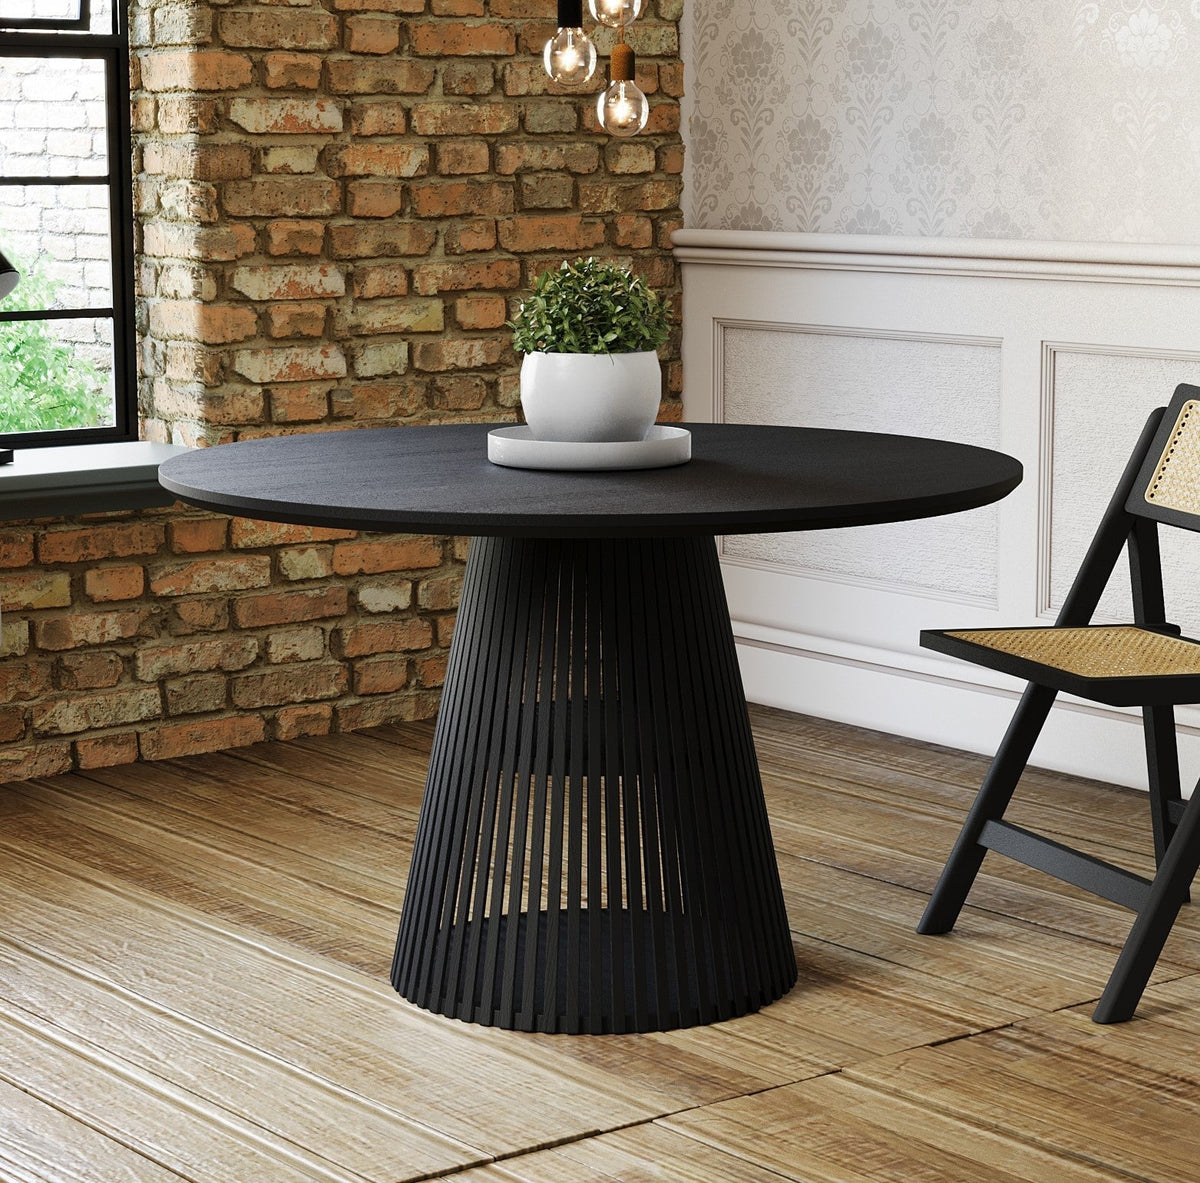 Round Solid Acacia Wood Dining Table in Black | Flute Design Base - 120cms Casa Maria Designs 